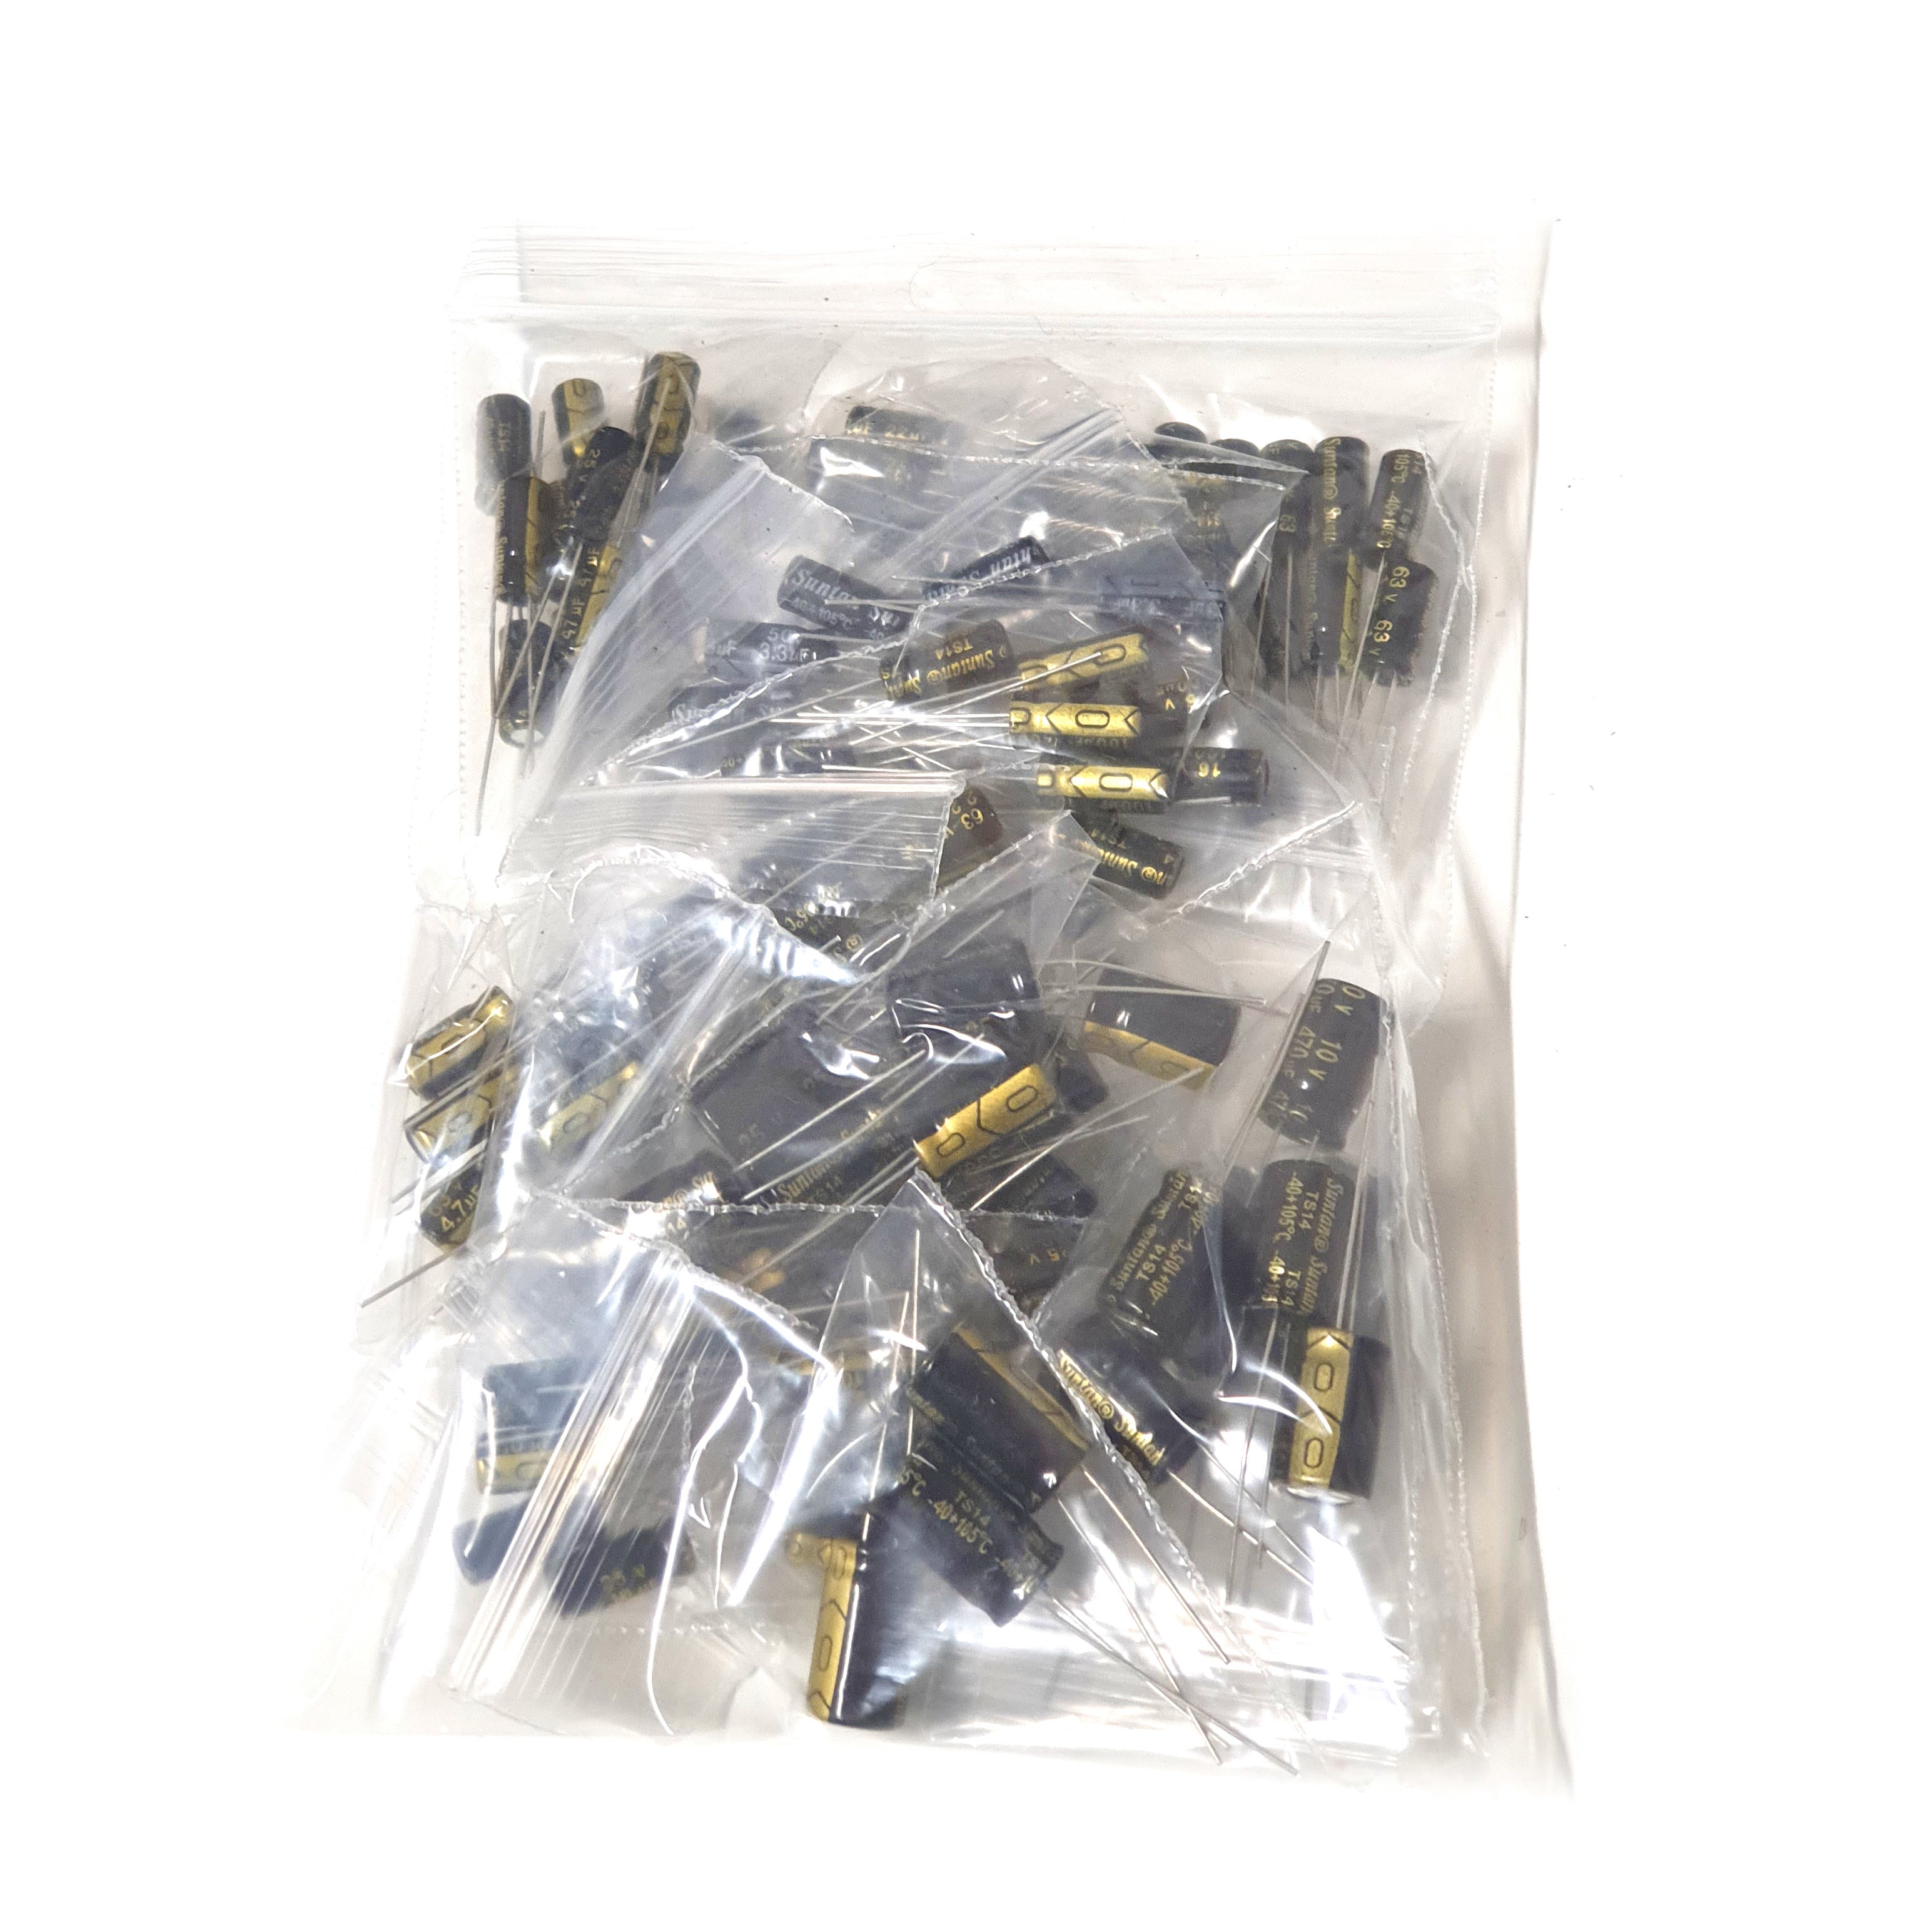 Electrolytic Capacitor Kit 14 Different Values